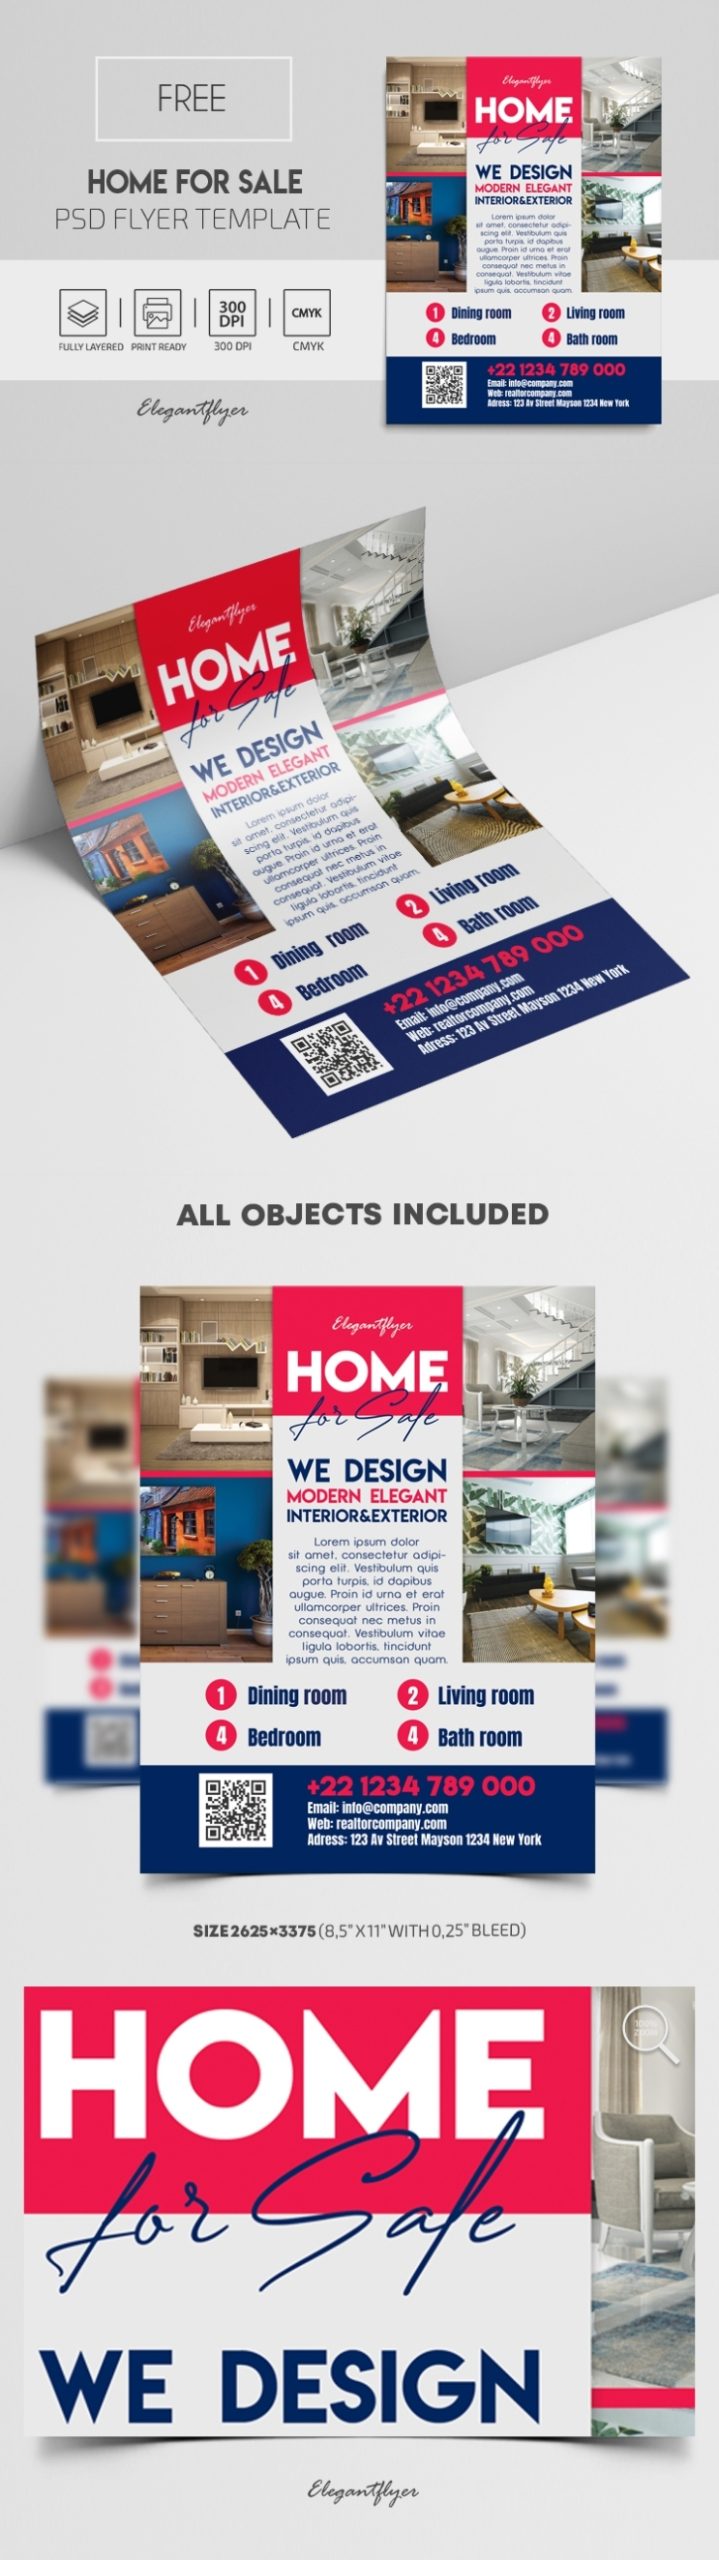 Home For Sale – Free Psd Flyer Template – By Elegantflyer For Home For Sale Flyer Template